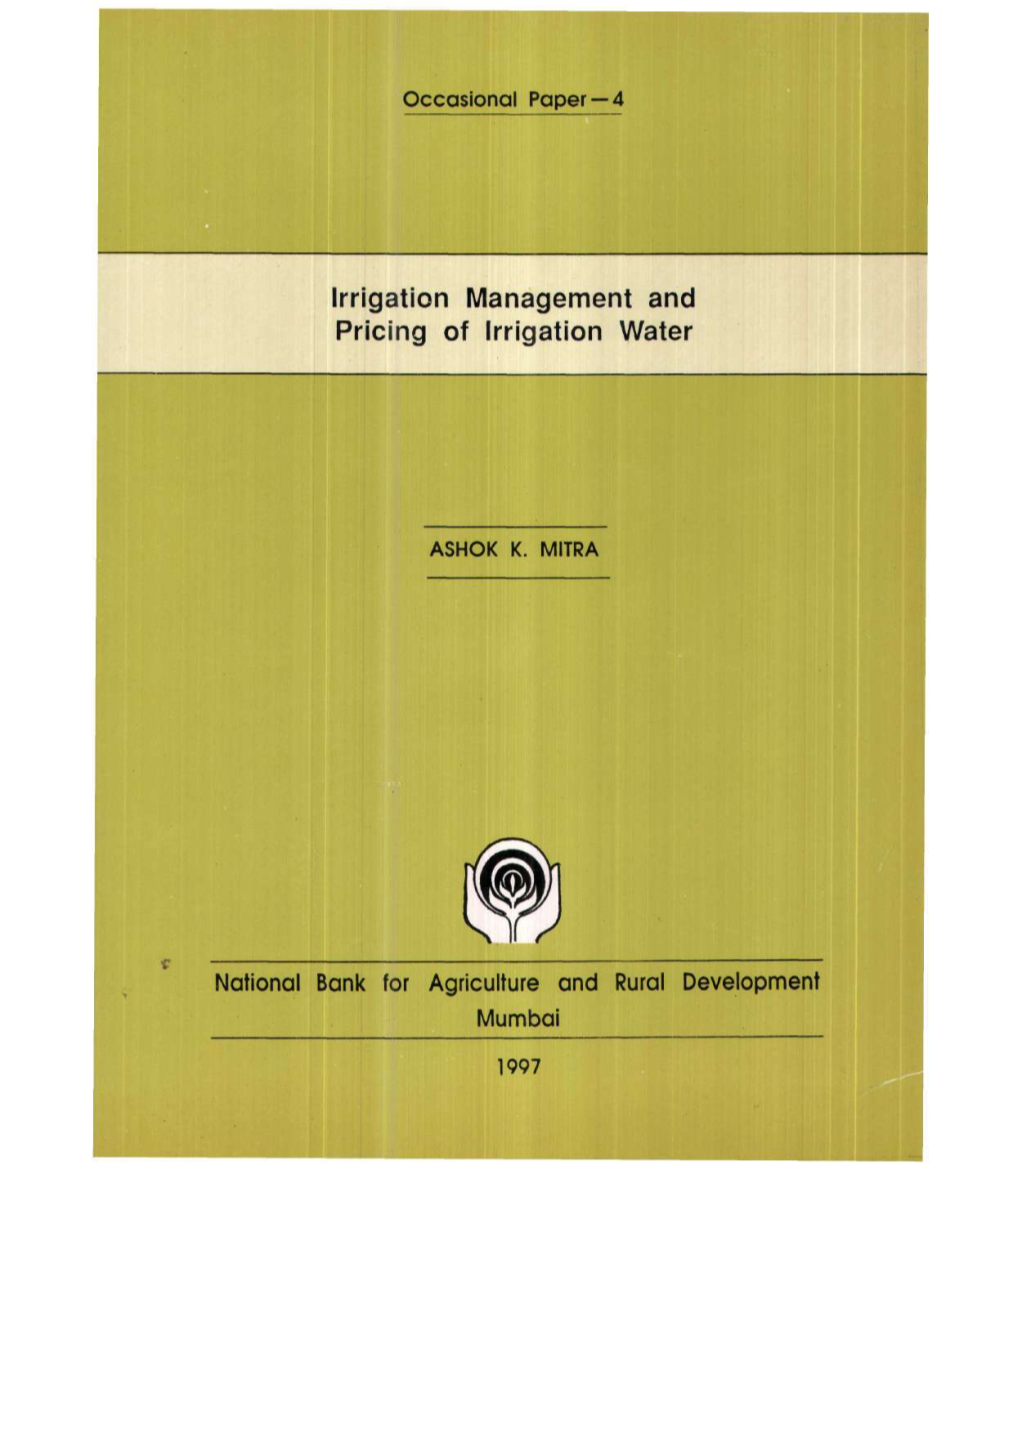 Irrigation Management and Pricing of Irrigation Water